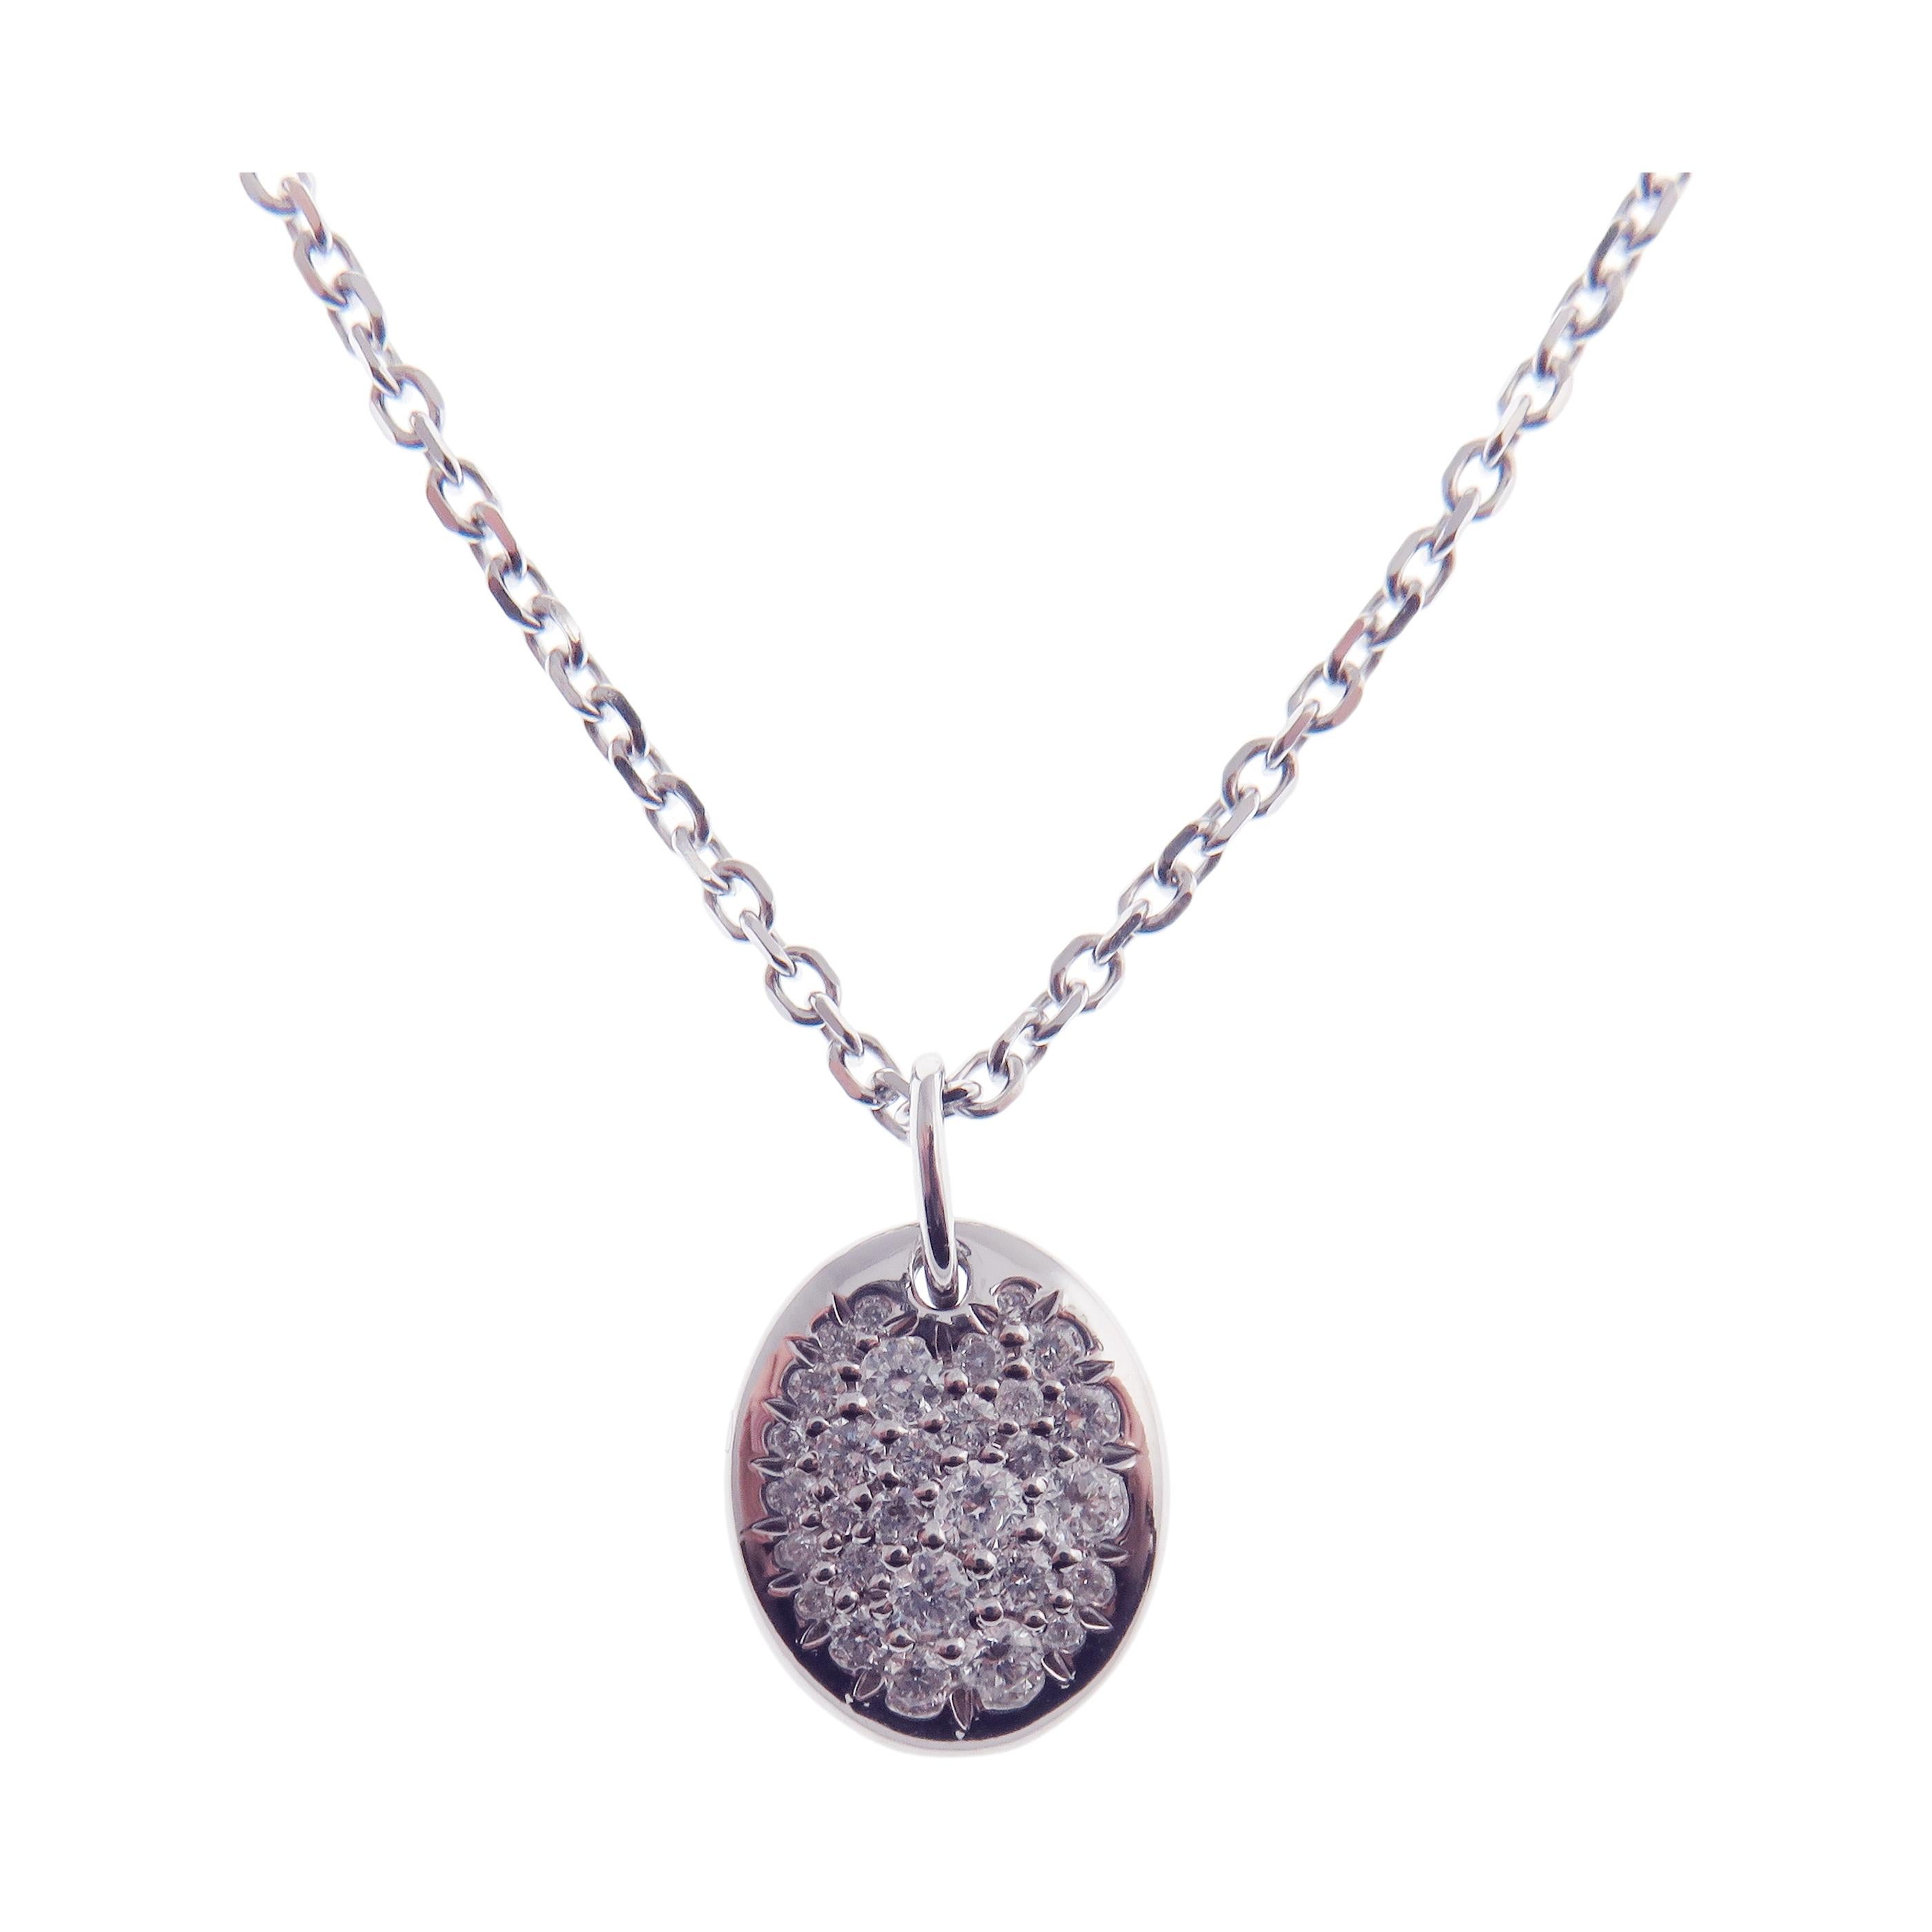 This pave circle necklace is crafted in 18-karat white gold, weighing approximately 0.27 total carats of SI-H Quality white diamond. 

Necklace is 16